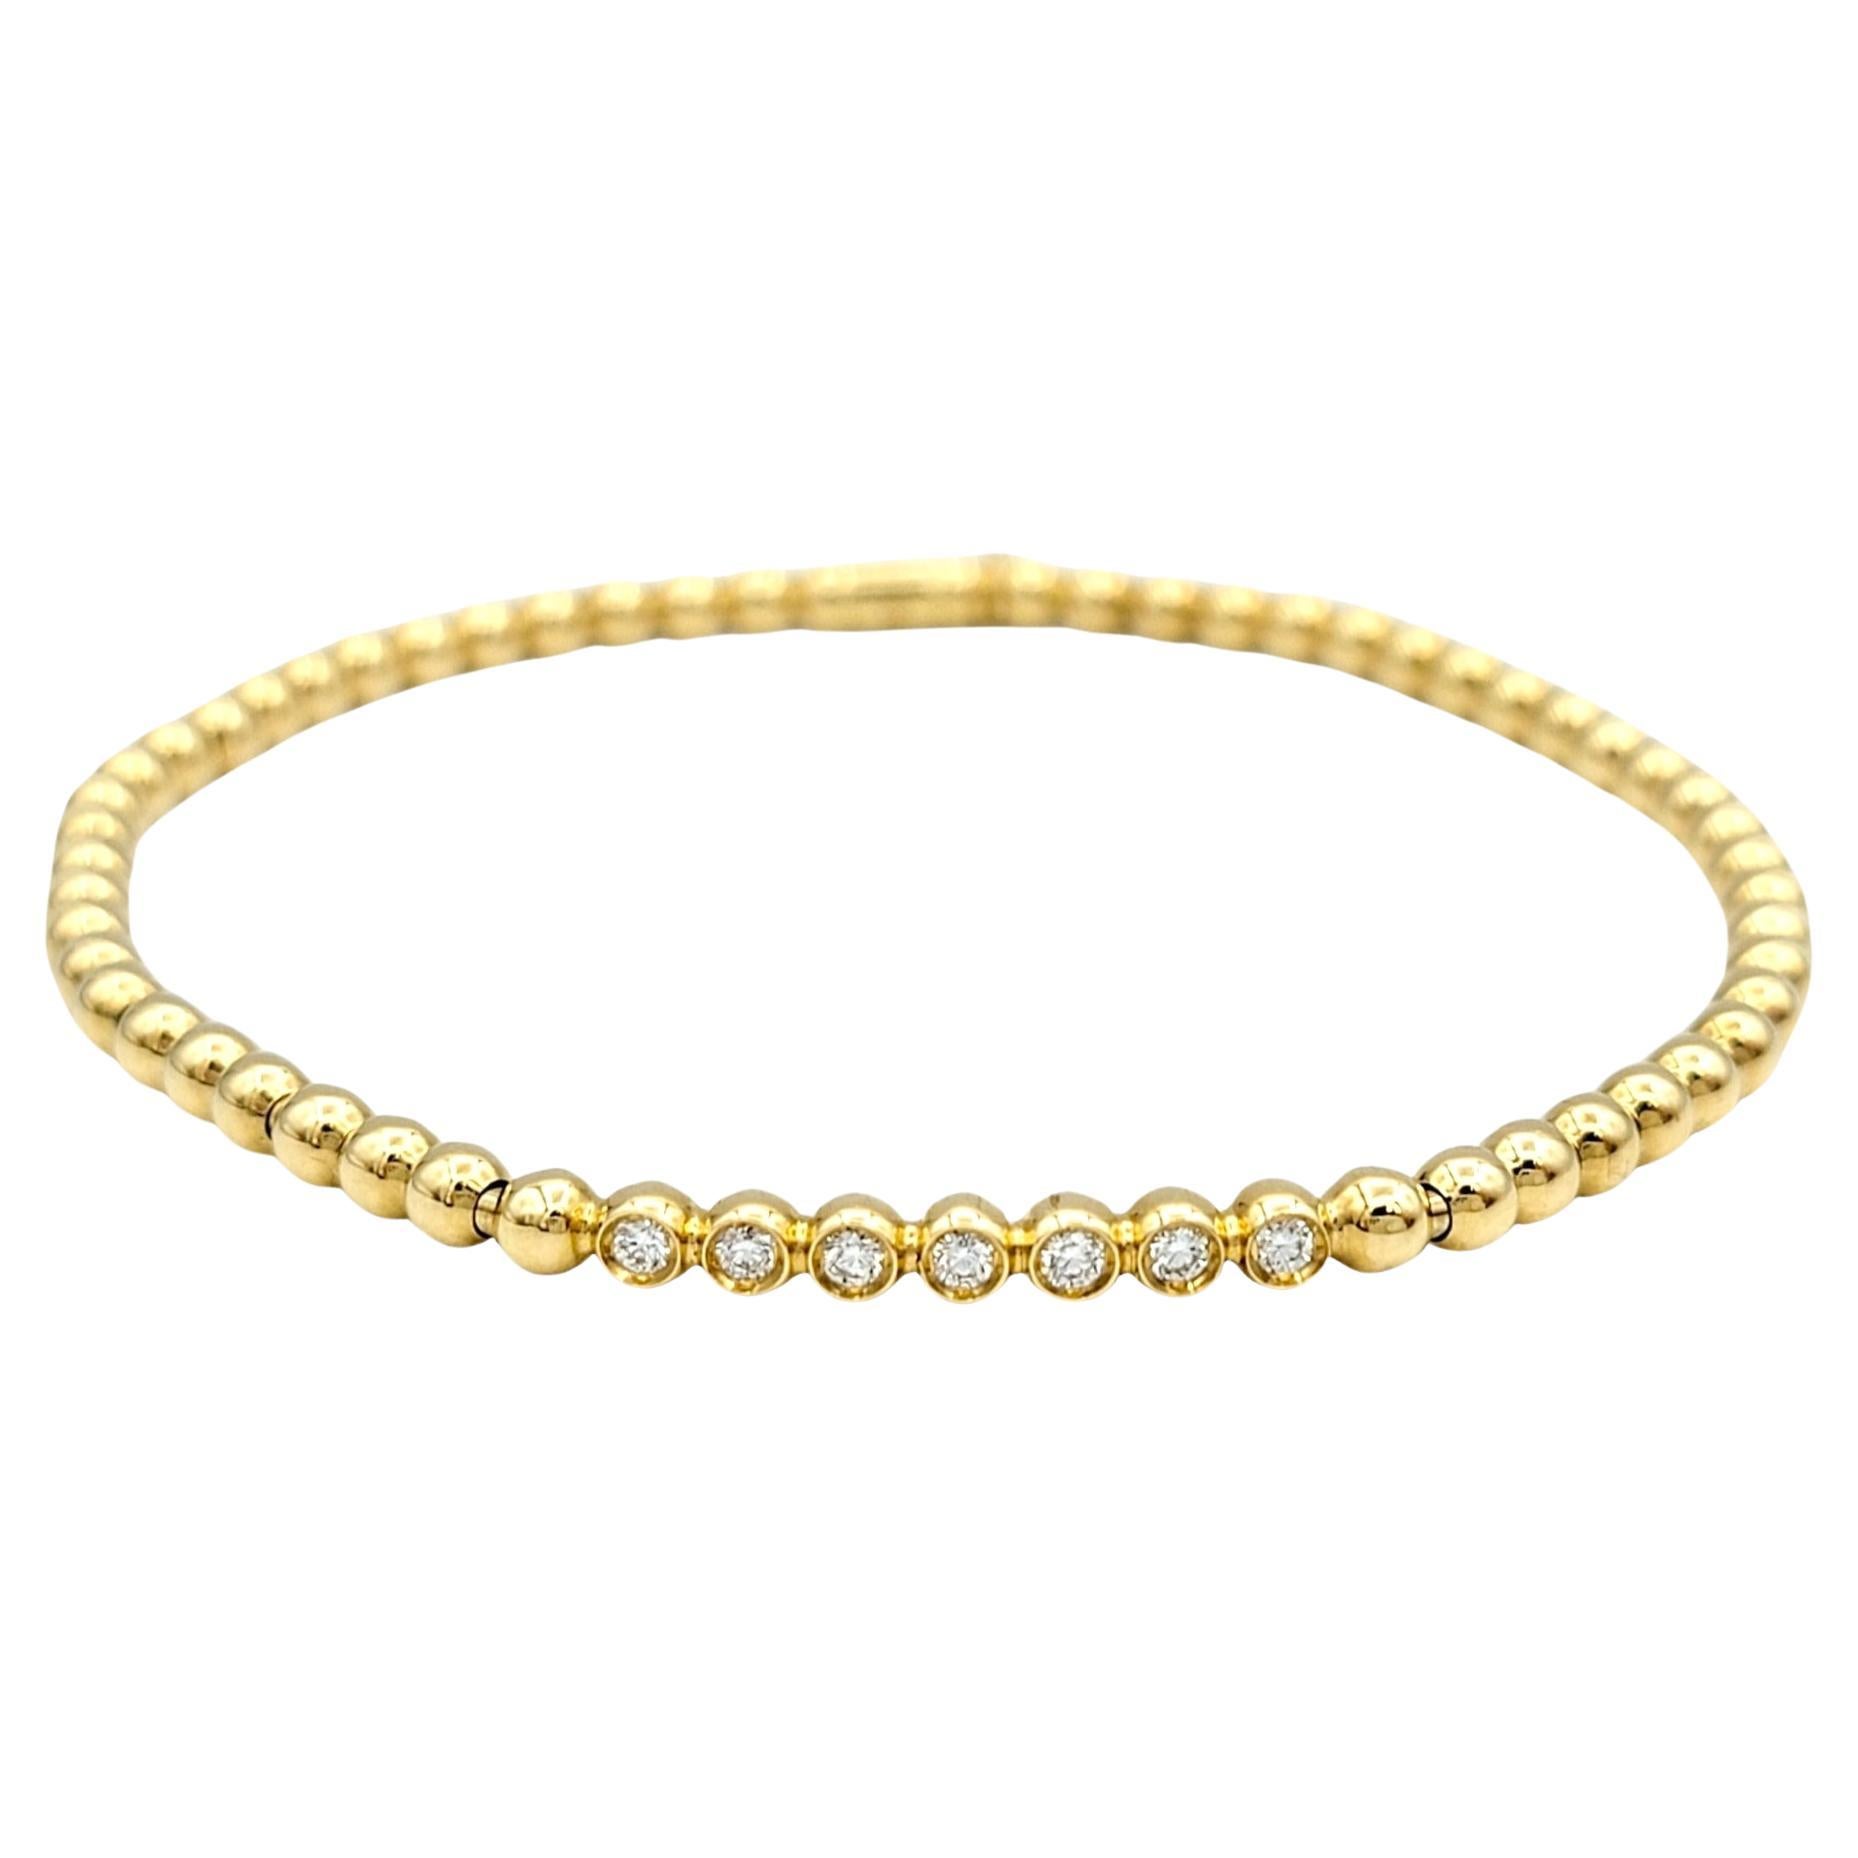 Hulchi Belluni Tresore Collection 3mm Stretch Bracelet Yellow Gold and Diamonds For Sale